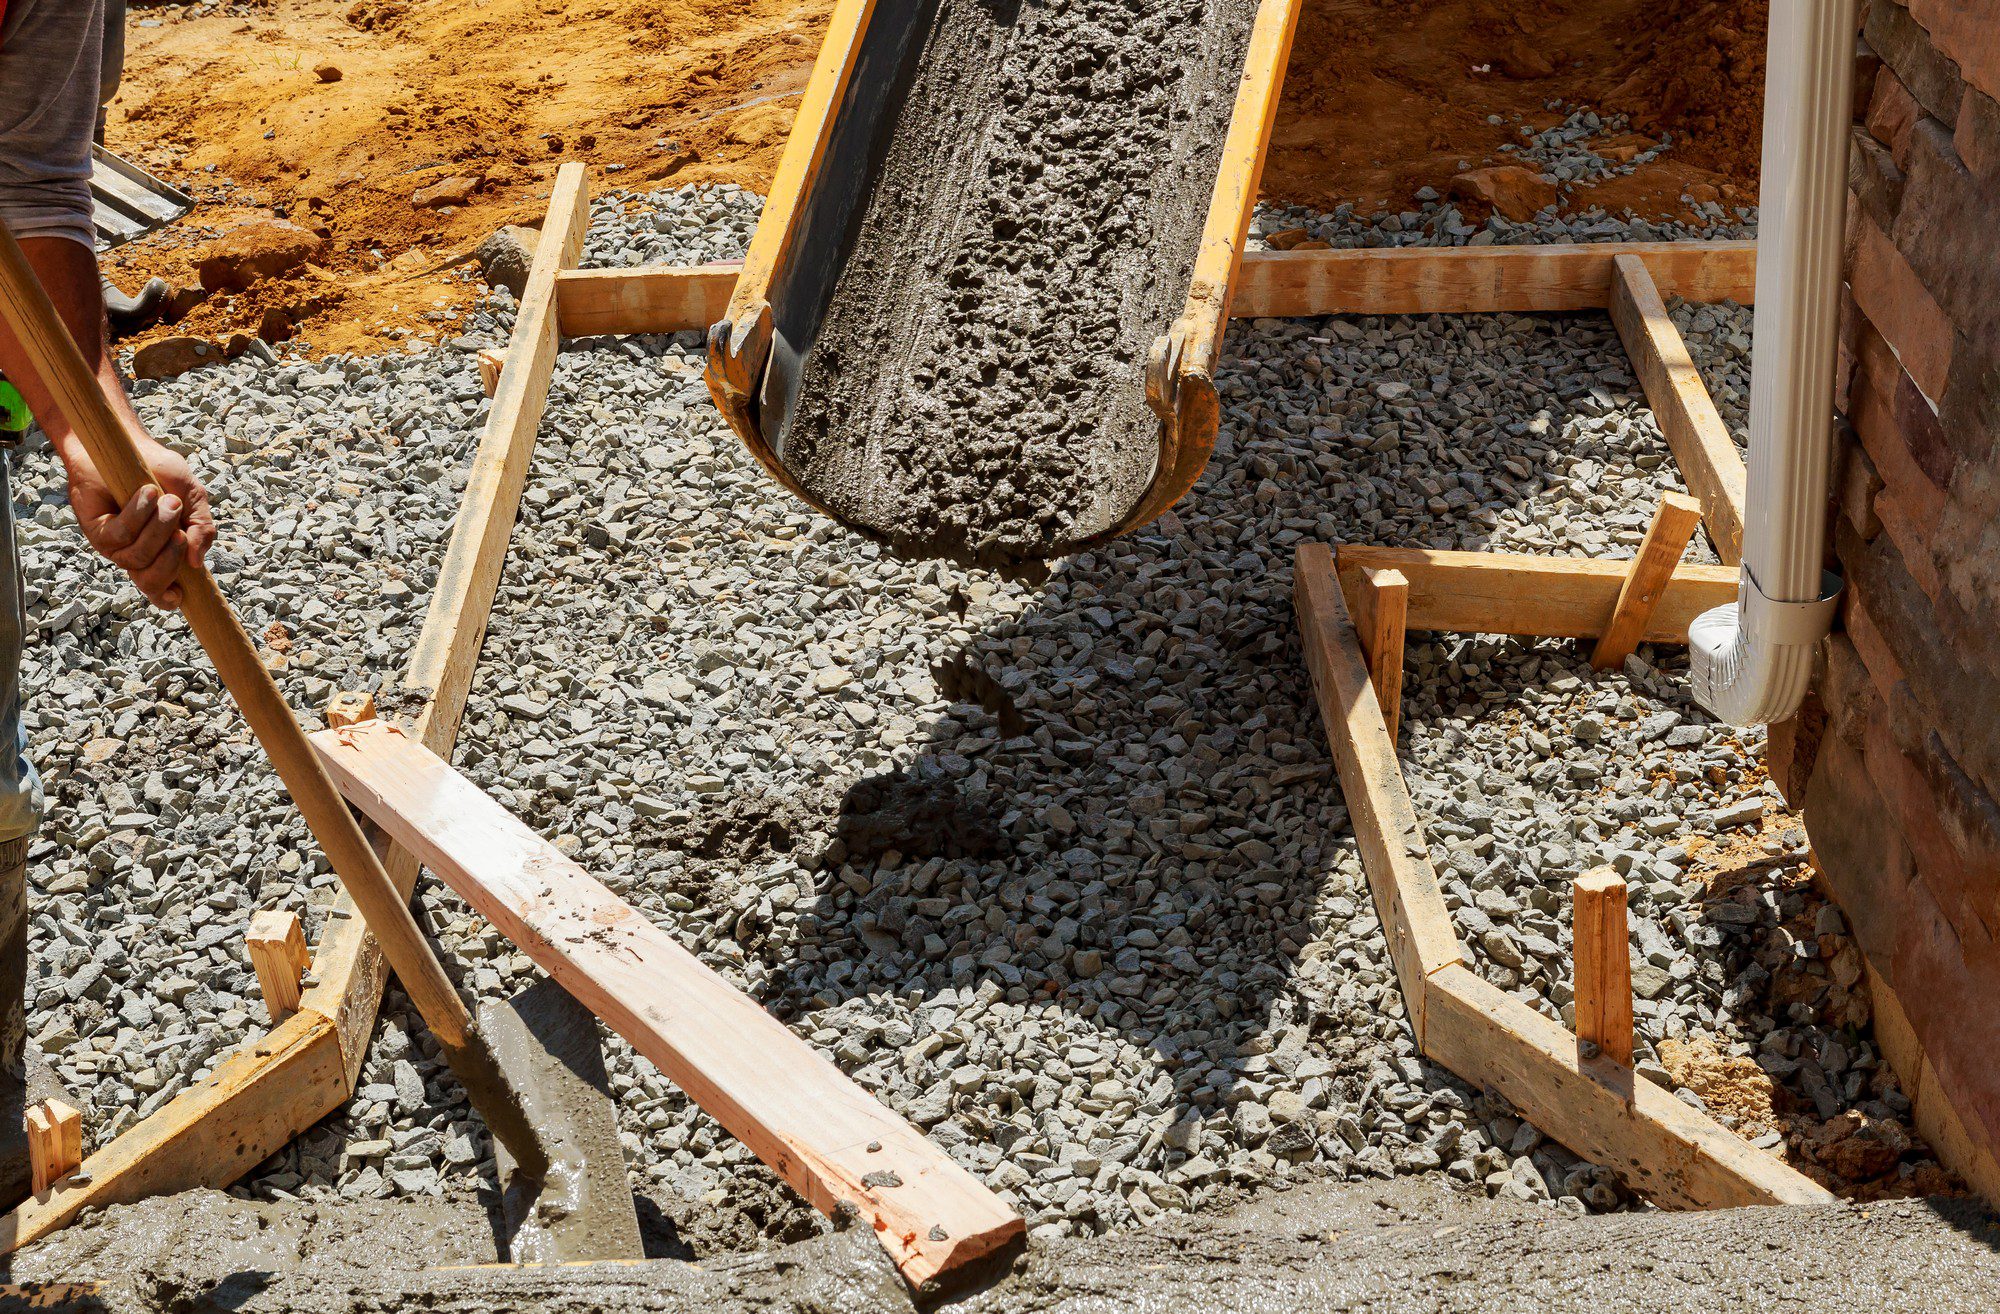 The image shows a construction site where concrete is being poured. The concrete is coming out of a chute, which is likely attached to a concrete mixer lorry, and into a wooden formwork structure. This structure is designed to shape and hold the concrete in place as it cures, and it can be seen filled with gravel, which is often used as a base layer before pouring concrete.There is a person visible, although only partially; the individual is manipulating a shovel, which is usually used to spread and level the concrete. The person appears to be wearing typical protective gear for construction work, like long trousers, and has a visible safety reflector band around their calf, which is often required on construction sites for visibility and safety purposes. The surrounding ground is dirt, indicating that this is an active construction area.